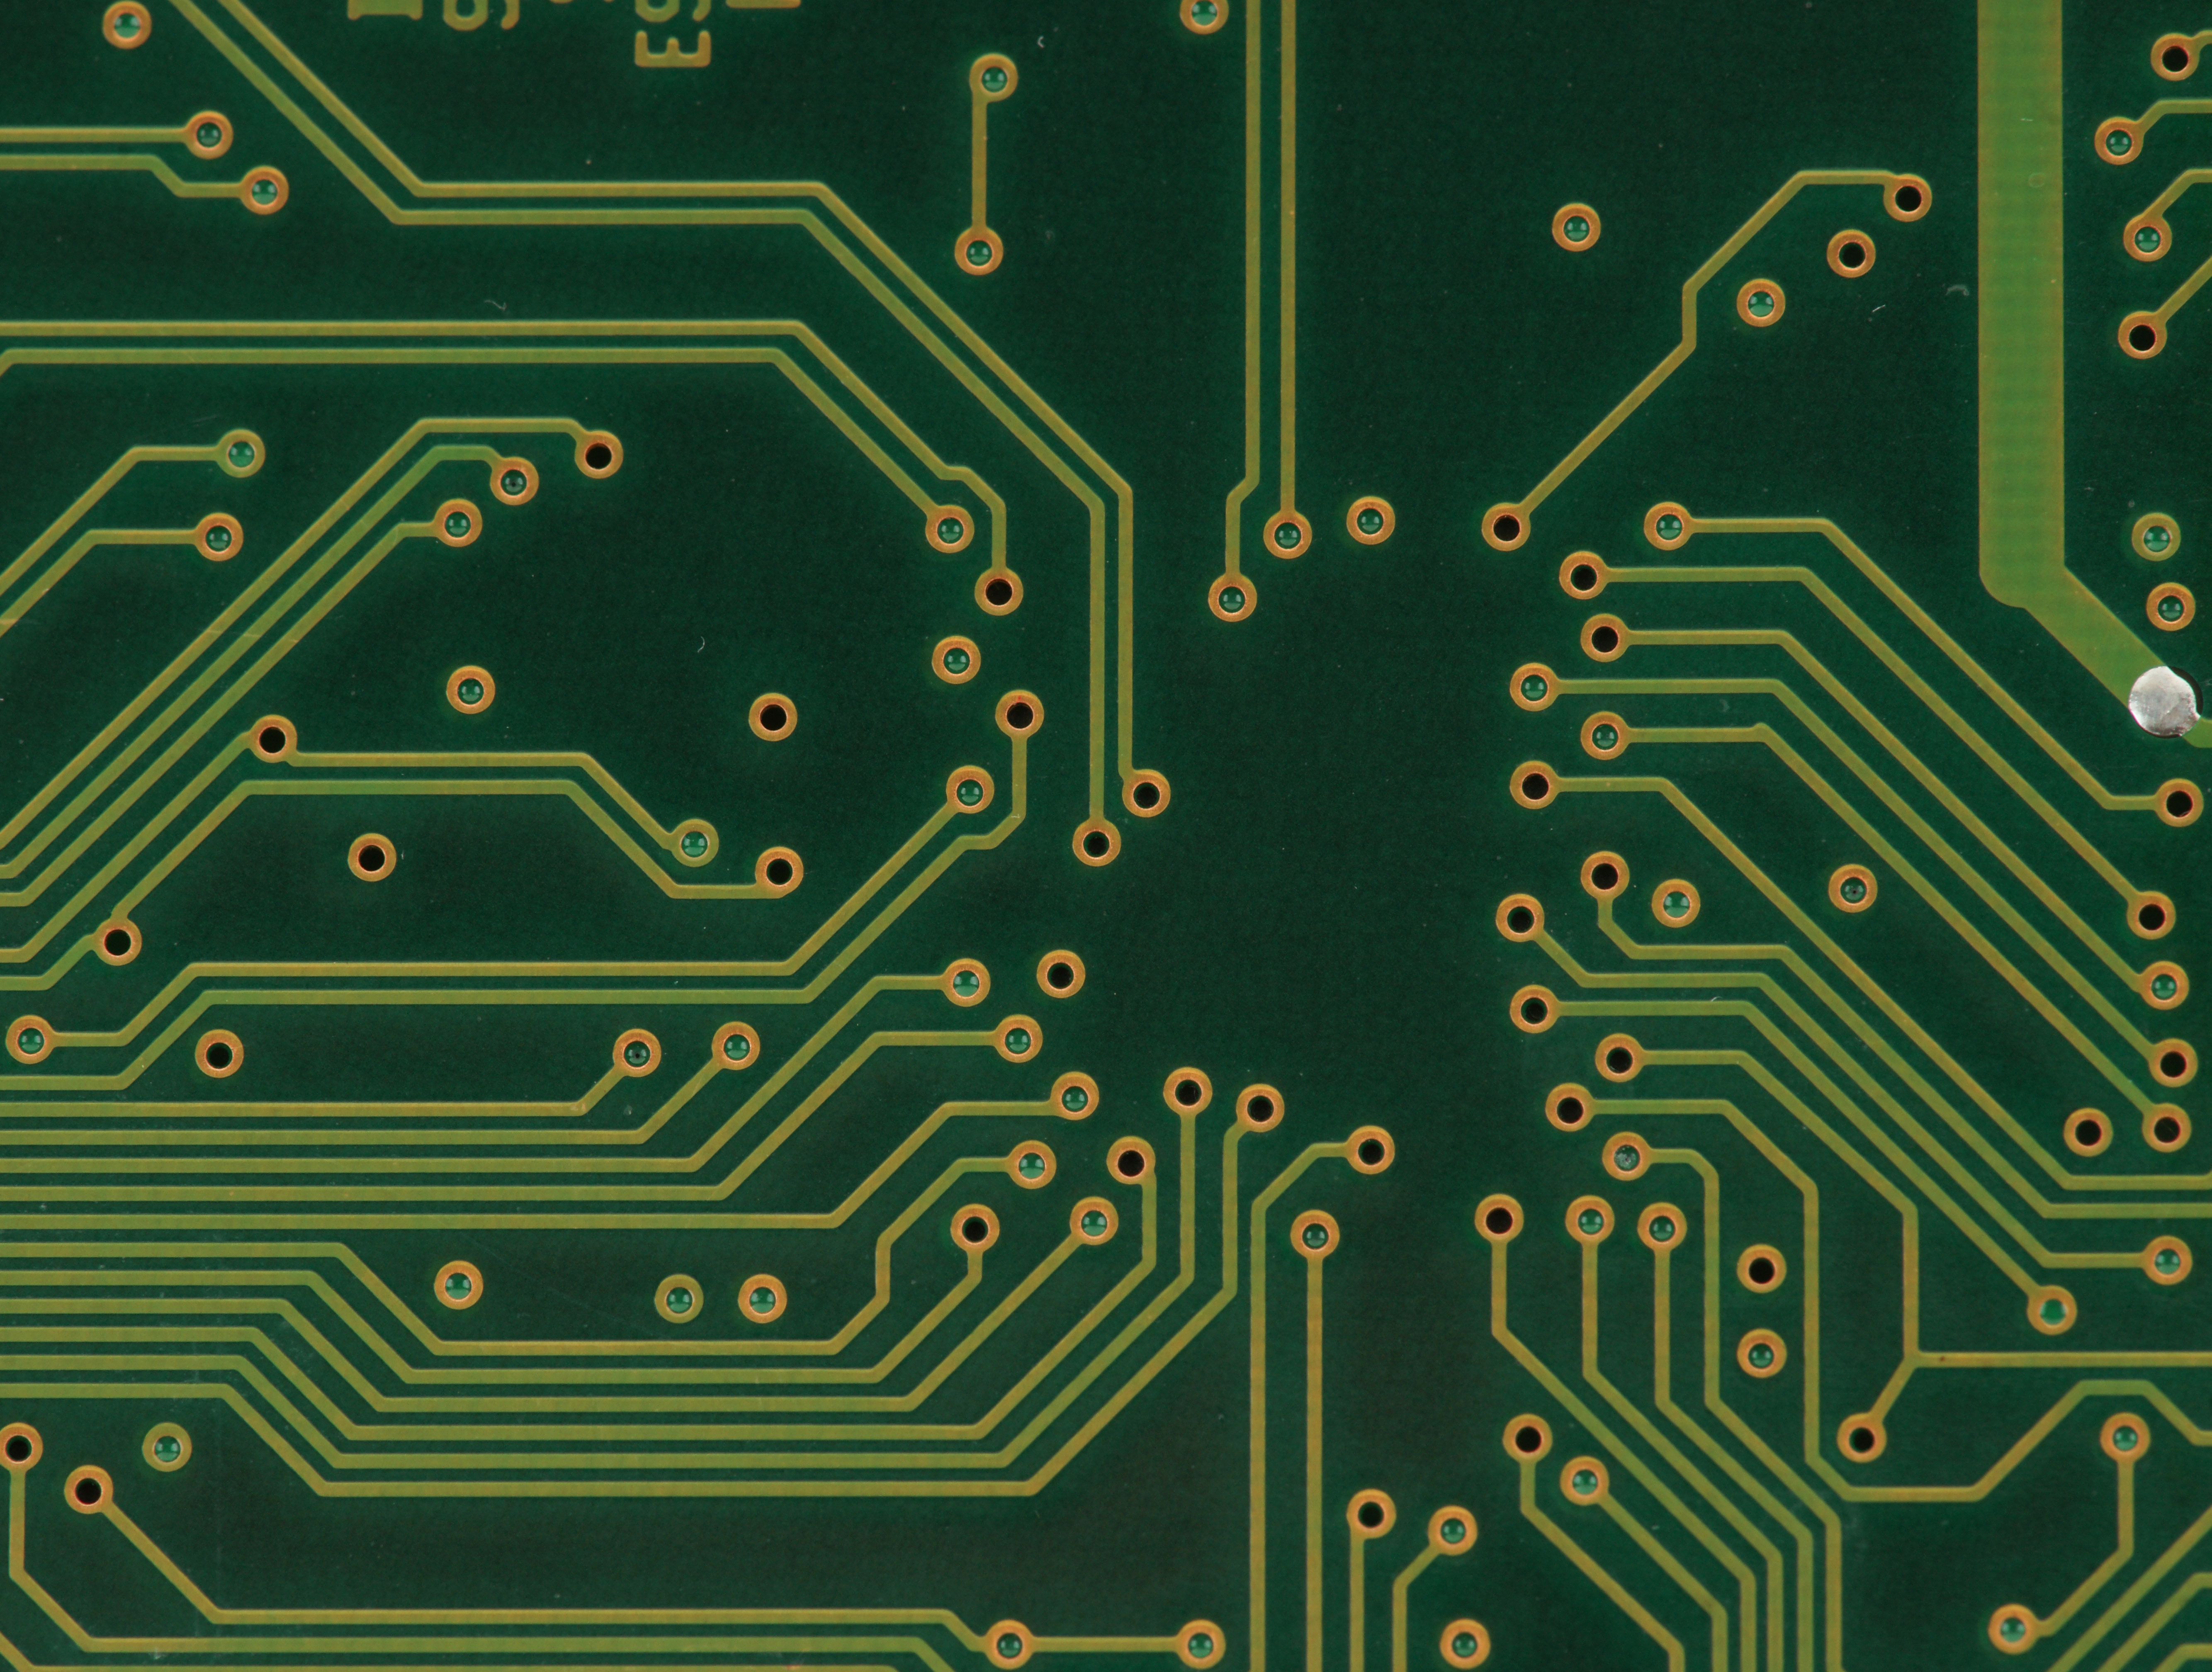 Photo of a Green PCB